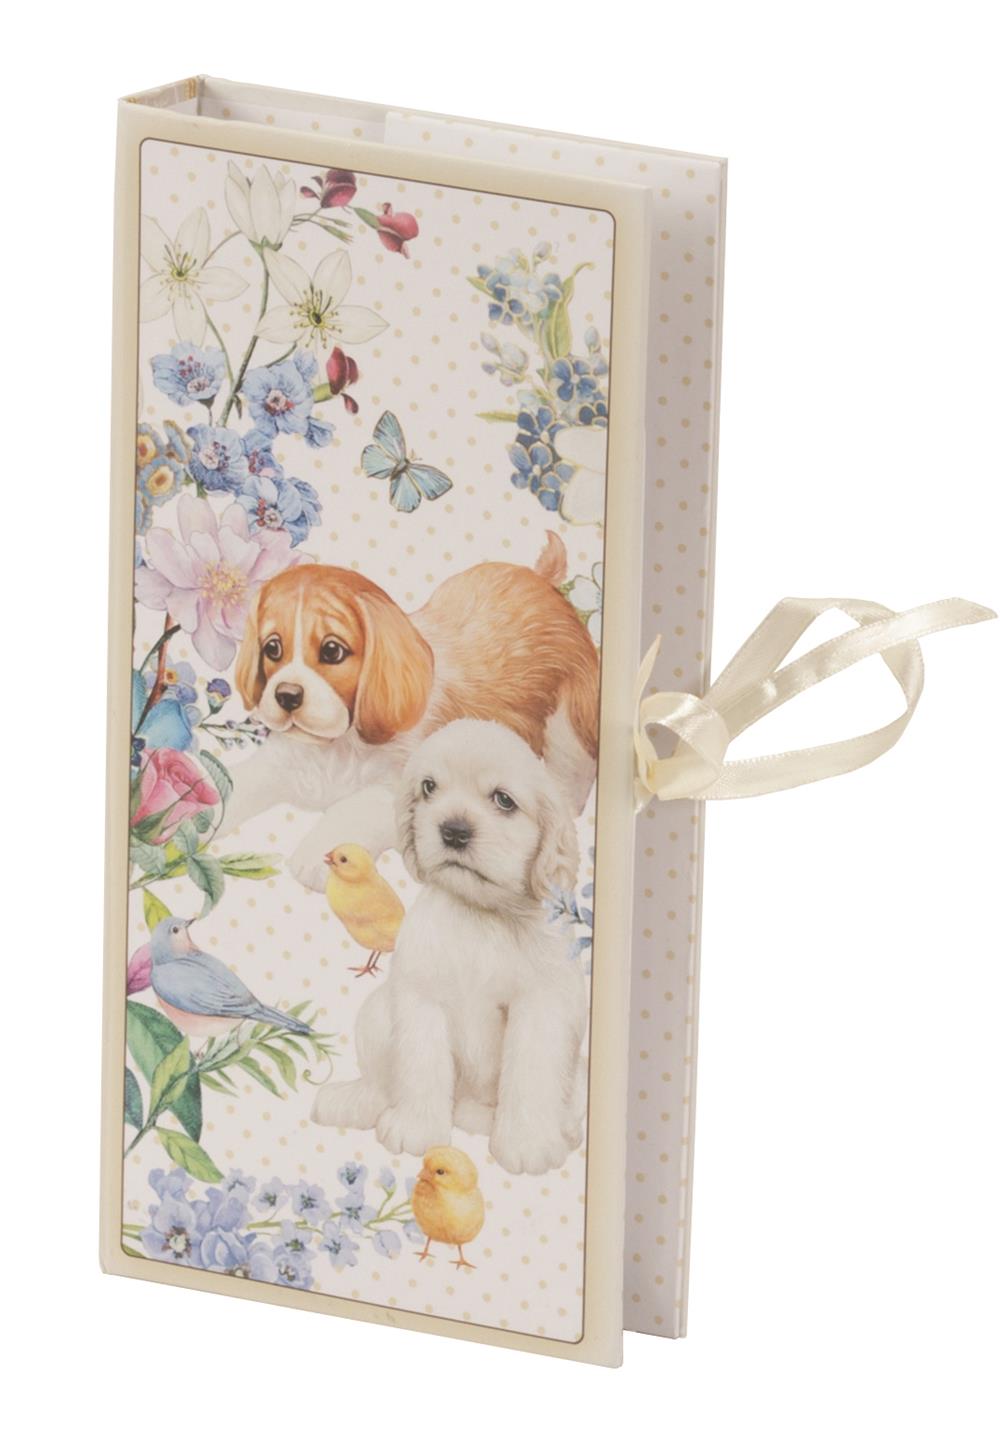 Cute puppy design notepad and notebook set